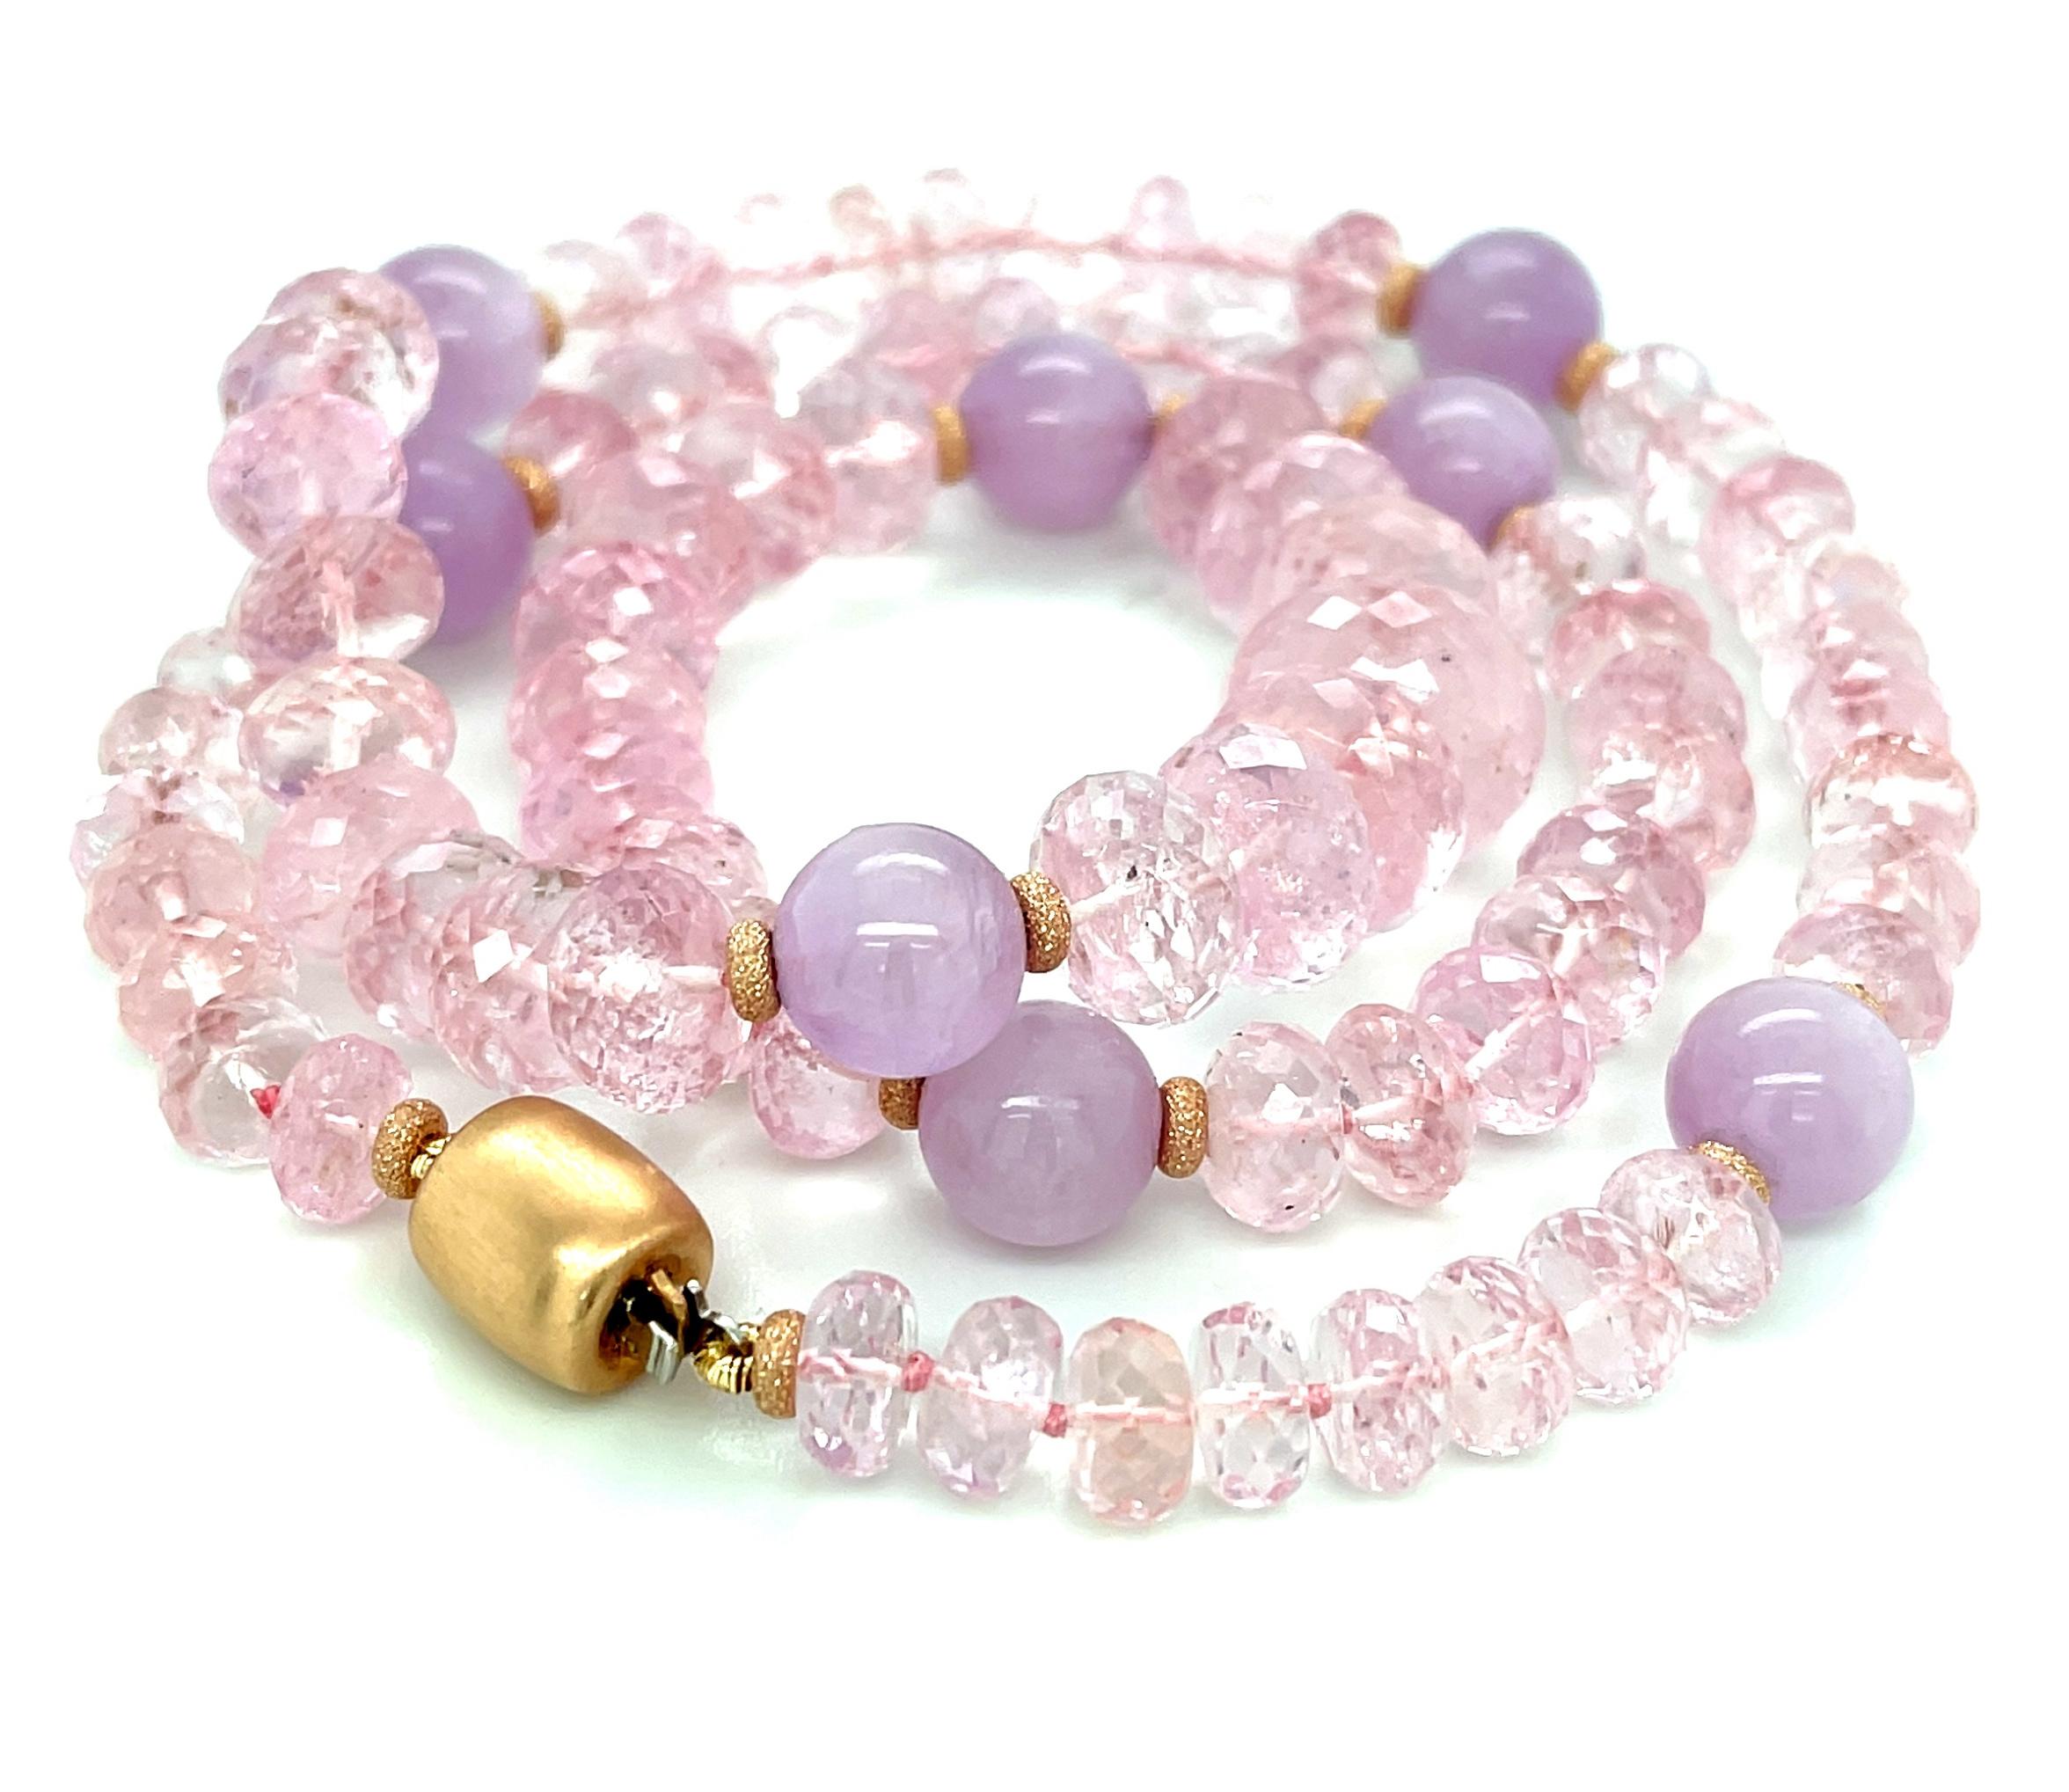 Artisan Rose Quartz and Kunzite Beaded Necklace with Rose Gold Accents For Sale